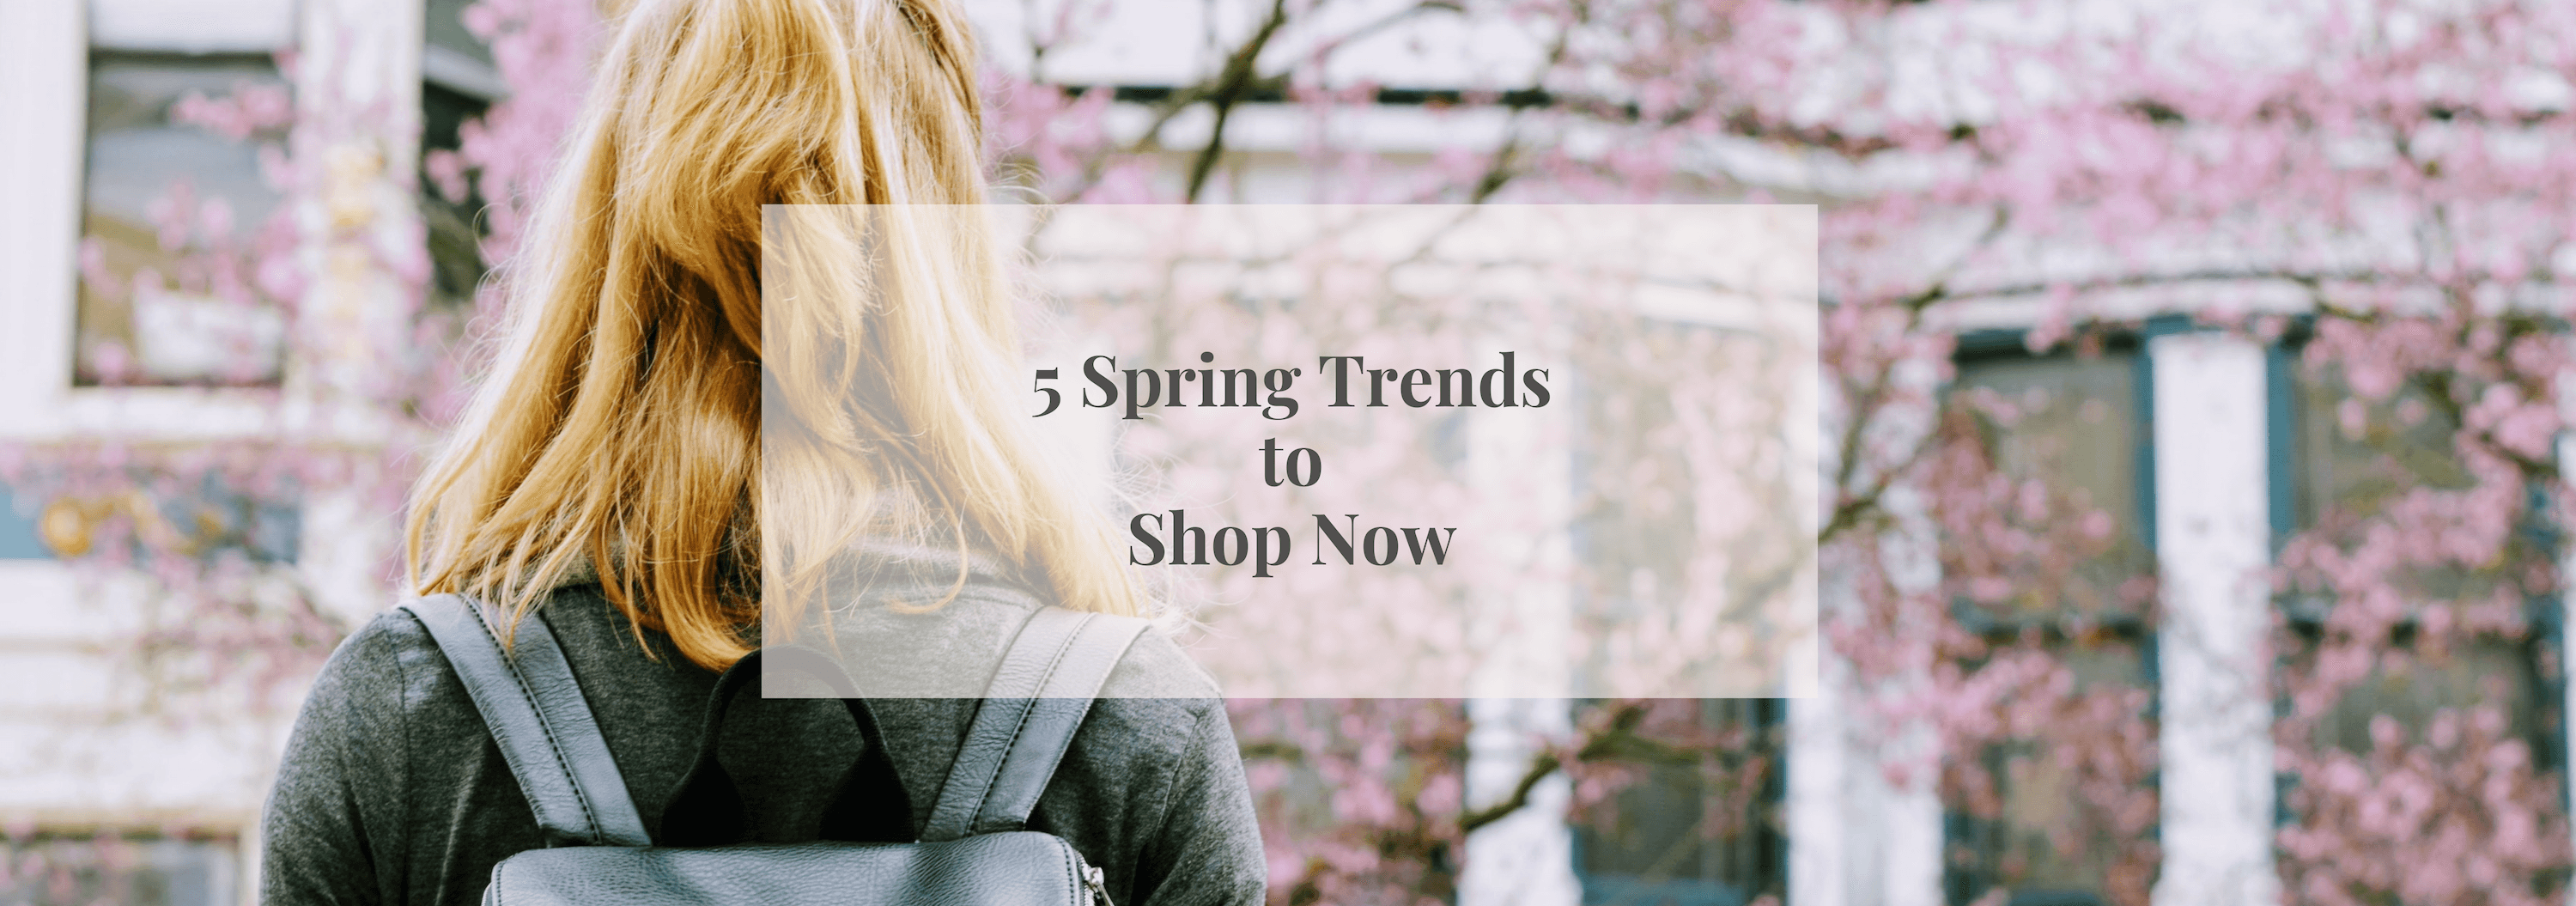 5 Spring Trends to Shop Now - Numi